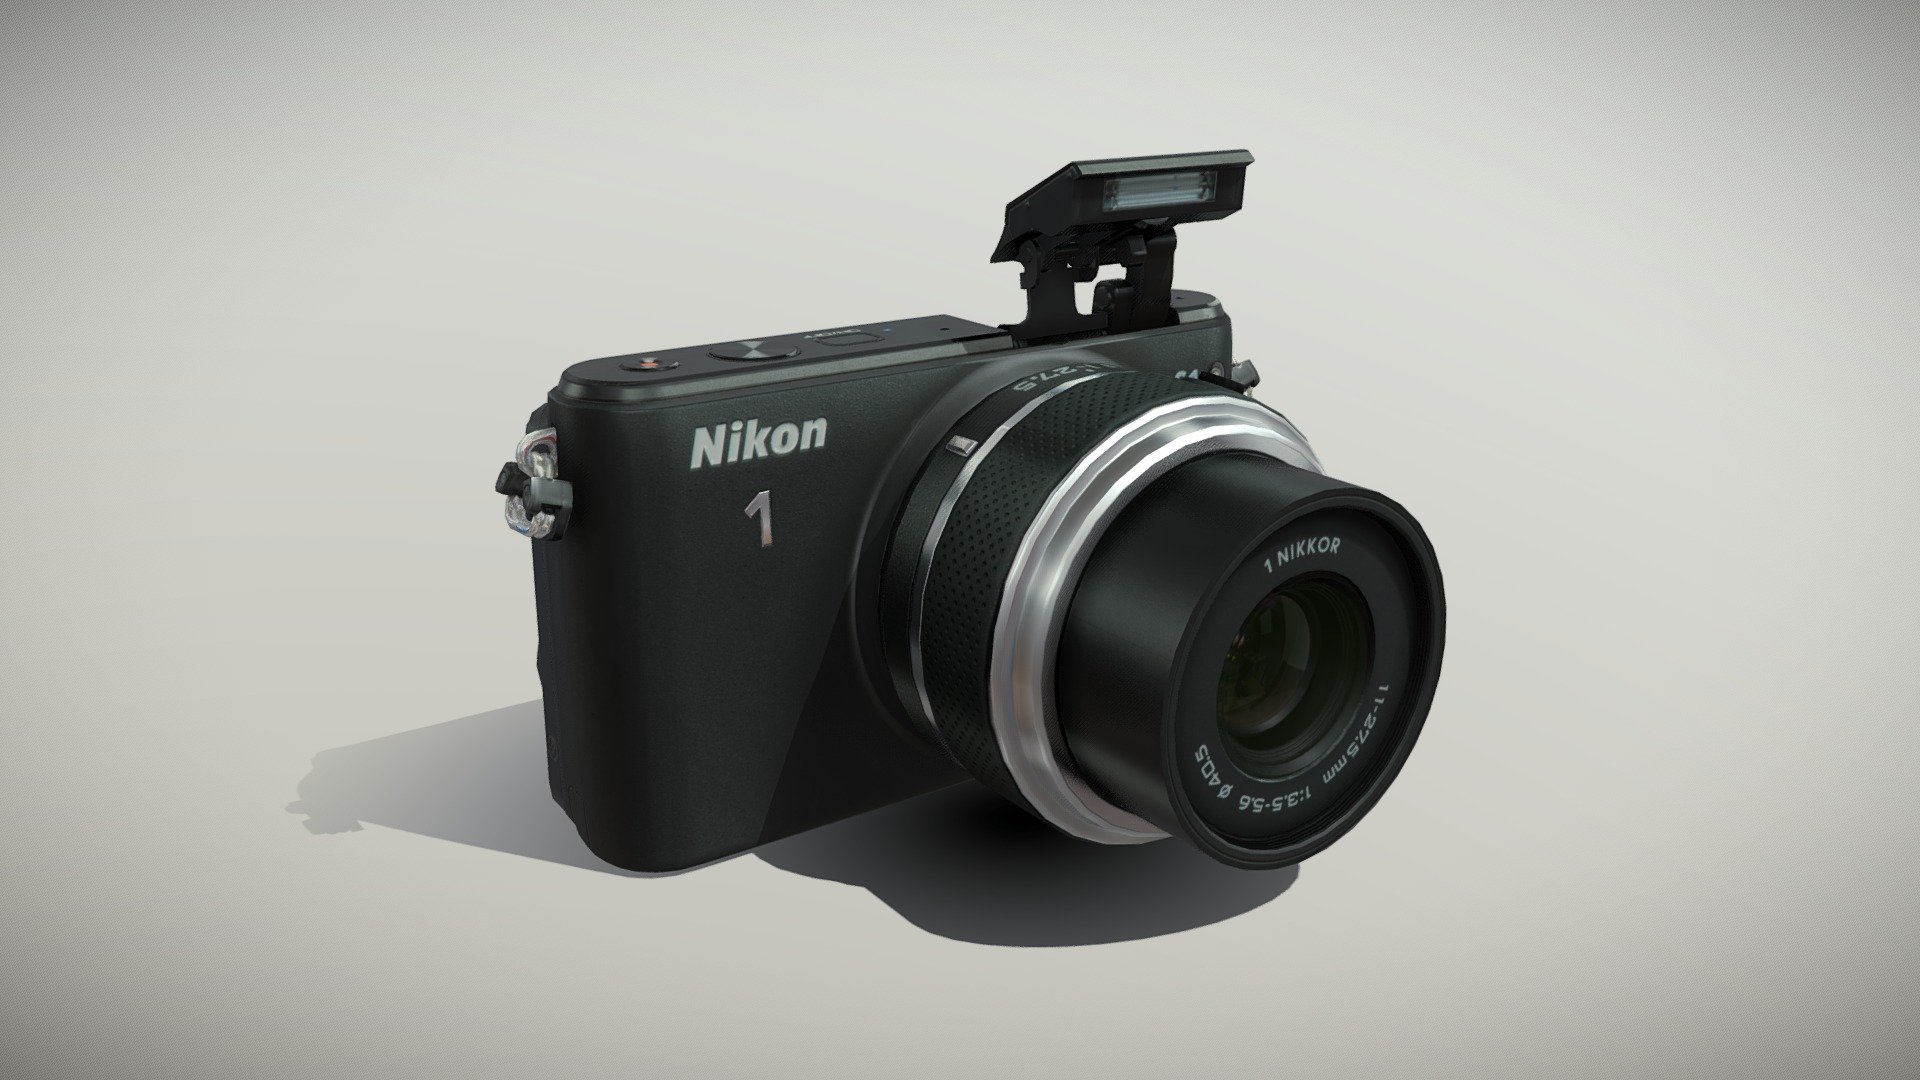 •   Let me present to you high-quality low-poly 3D model Nikon 1 S1 Kit 11-27.5mm Black. Modeling was made with ortho-photos of real camera that is why all details of design are recreated most authentically.

•    This model consists of a few meshes, it is low-polygonal and it has three materials (Body Camera, Body Lens and Glass of Lenses).

•   The total of the main textures is 9. Resolutions of all textures are 4096 pixels square aspect ratio in .png format. Also there is original texture file .PSD format in separate archive.

•   Polygon count of the model is – 6541.

•   The model has correct dimensions in real-world scale. All parts grouped and named correctly.

•   To use the model in other 3D programs there are scenes saved in formats .fbx, .obj, .DAE, .max (2010 version).

Note: If you see some artifacts on the textures, it means compression works in the Viewer. We recommend setting HD quality for textures. But anyway, original textures have no artifacts 3d model